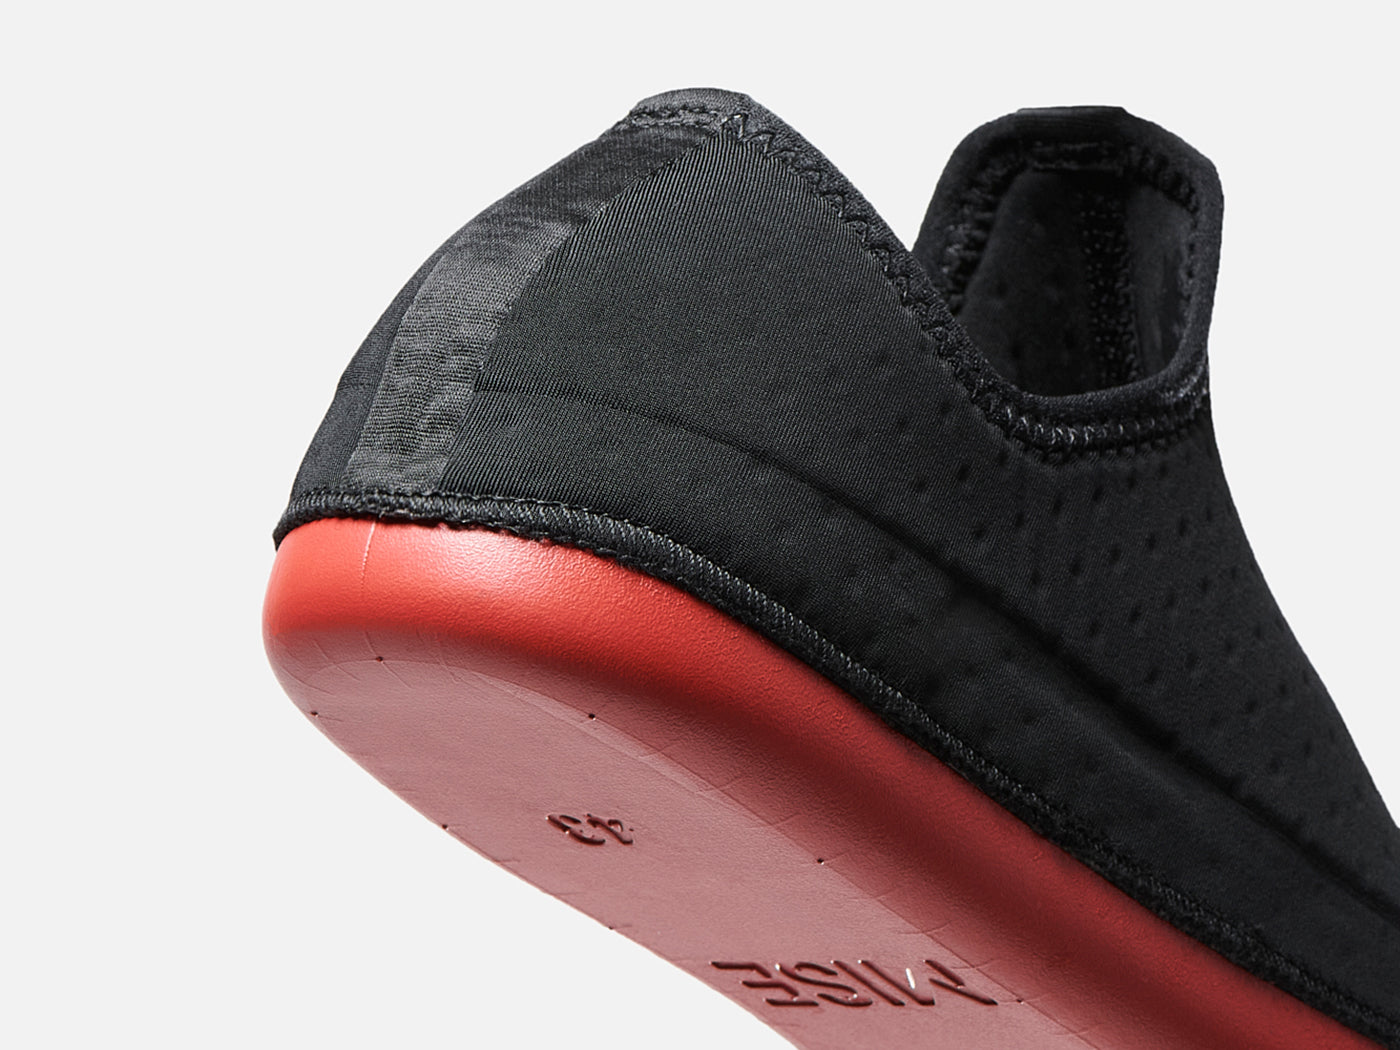 MISE removable Insoles are made from supportive neoprene to keep feet comfortable in any kitchen or culinary environment 